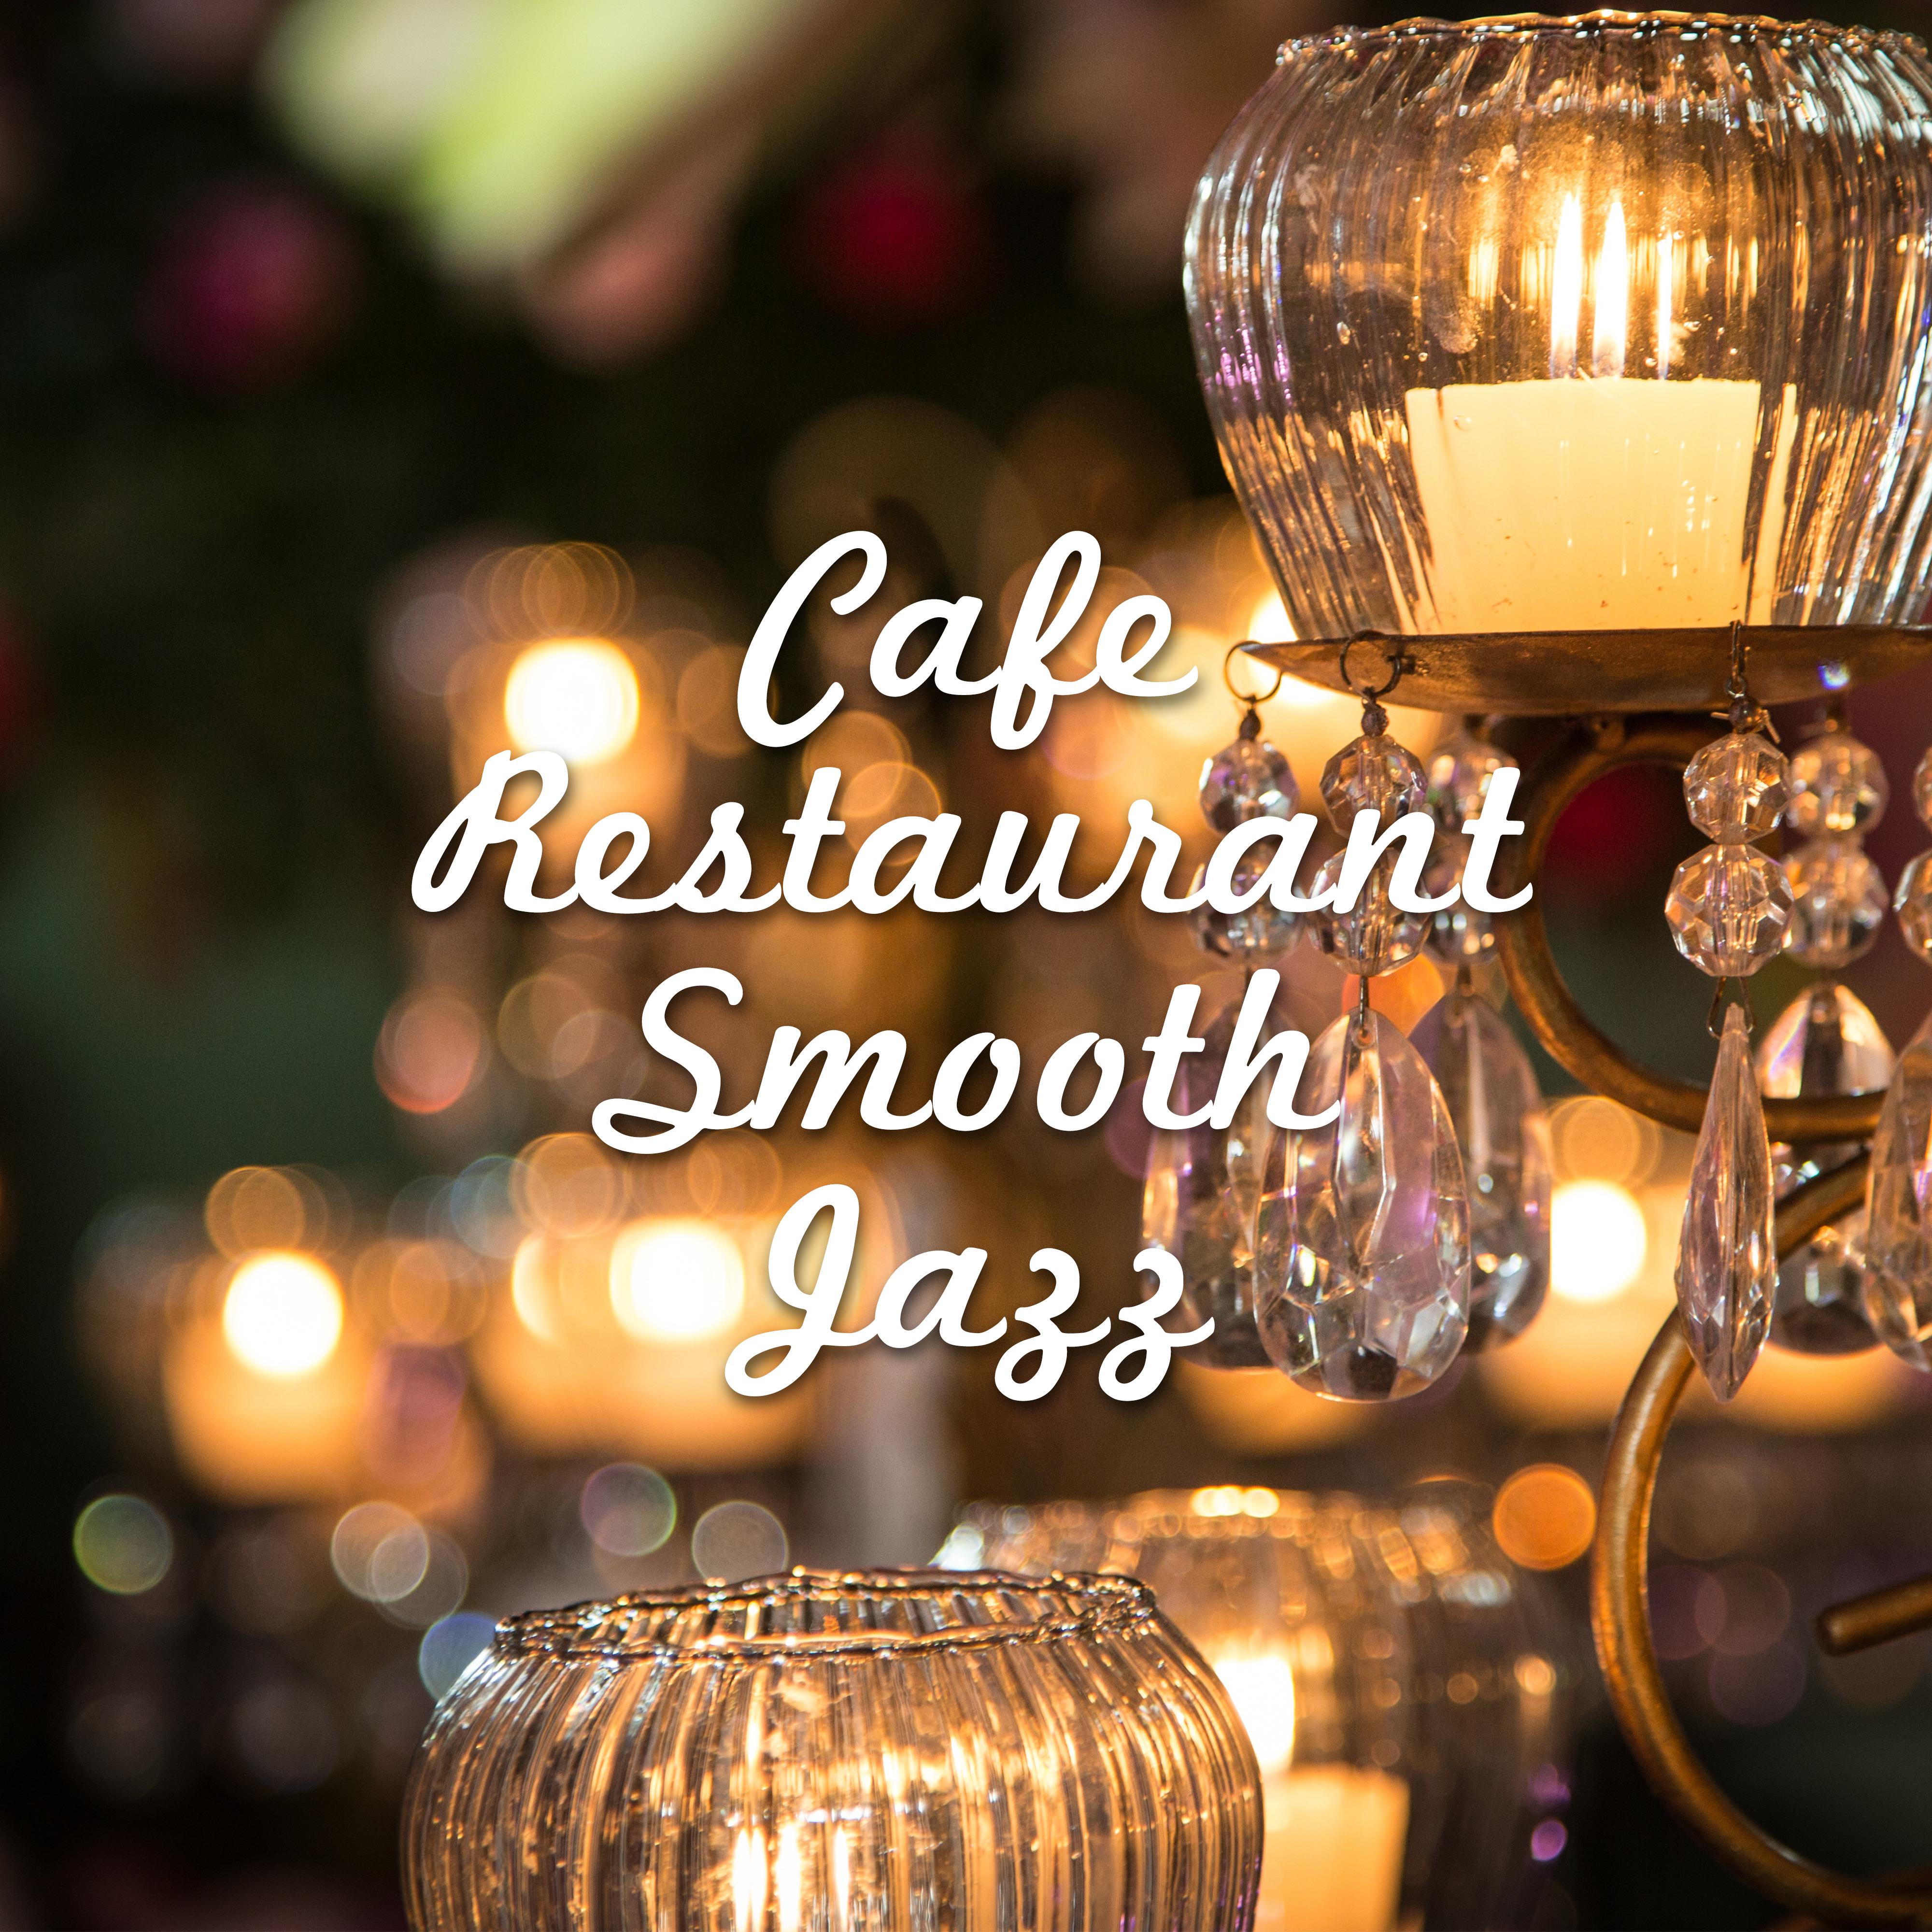 Cafe Restaurant Smooth Jazz  Chilled Jazz Music, Piano Relaxation, Stress Relief, Moonlight Jazz